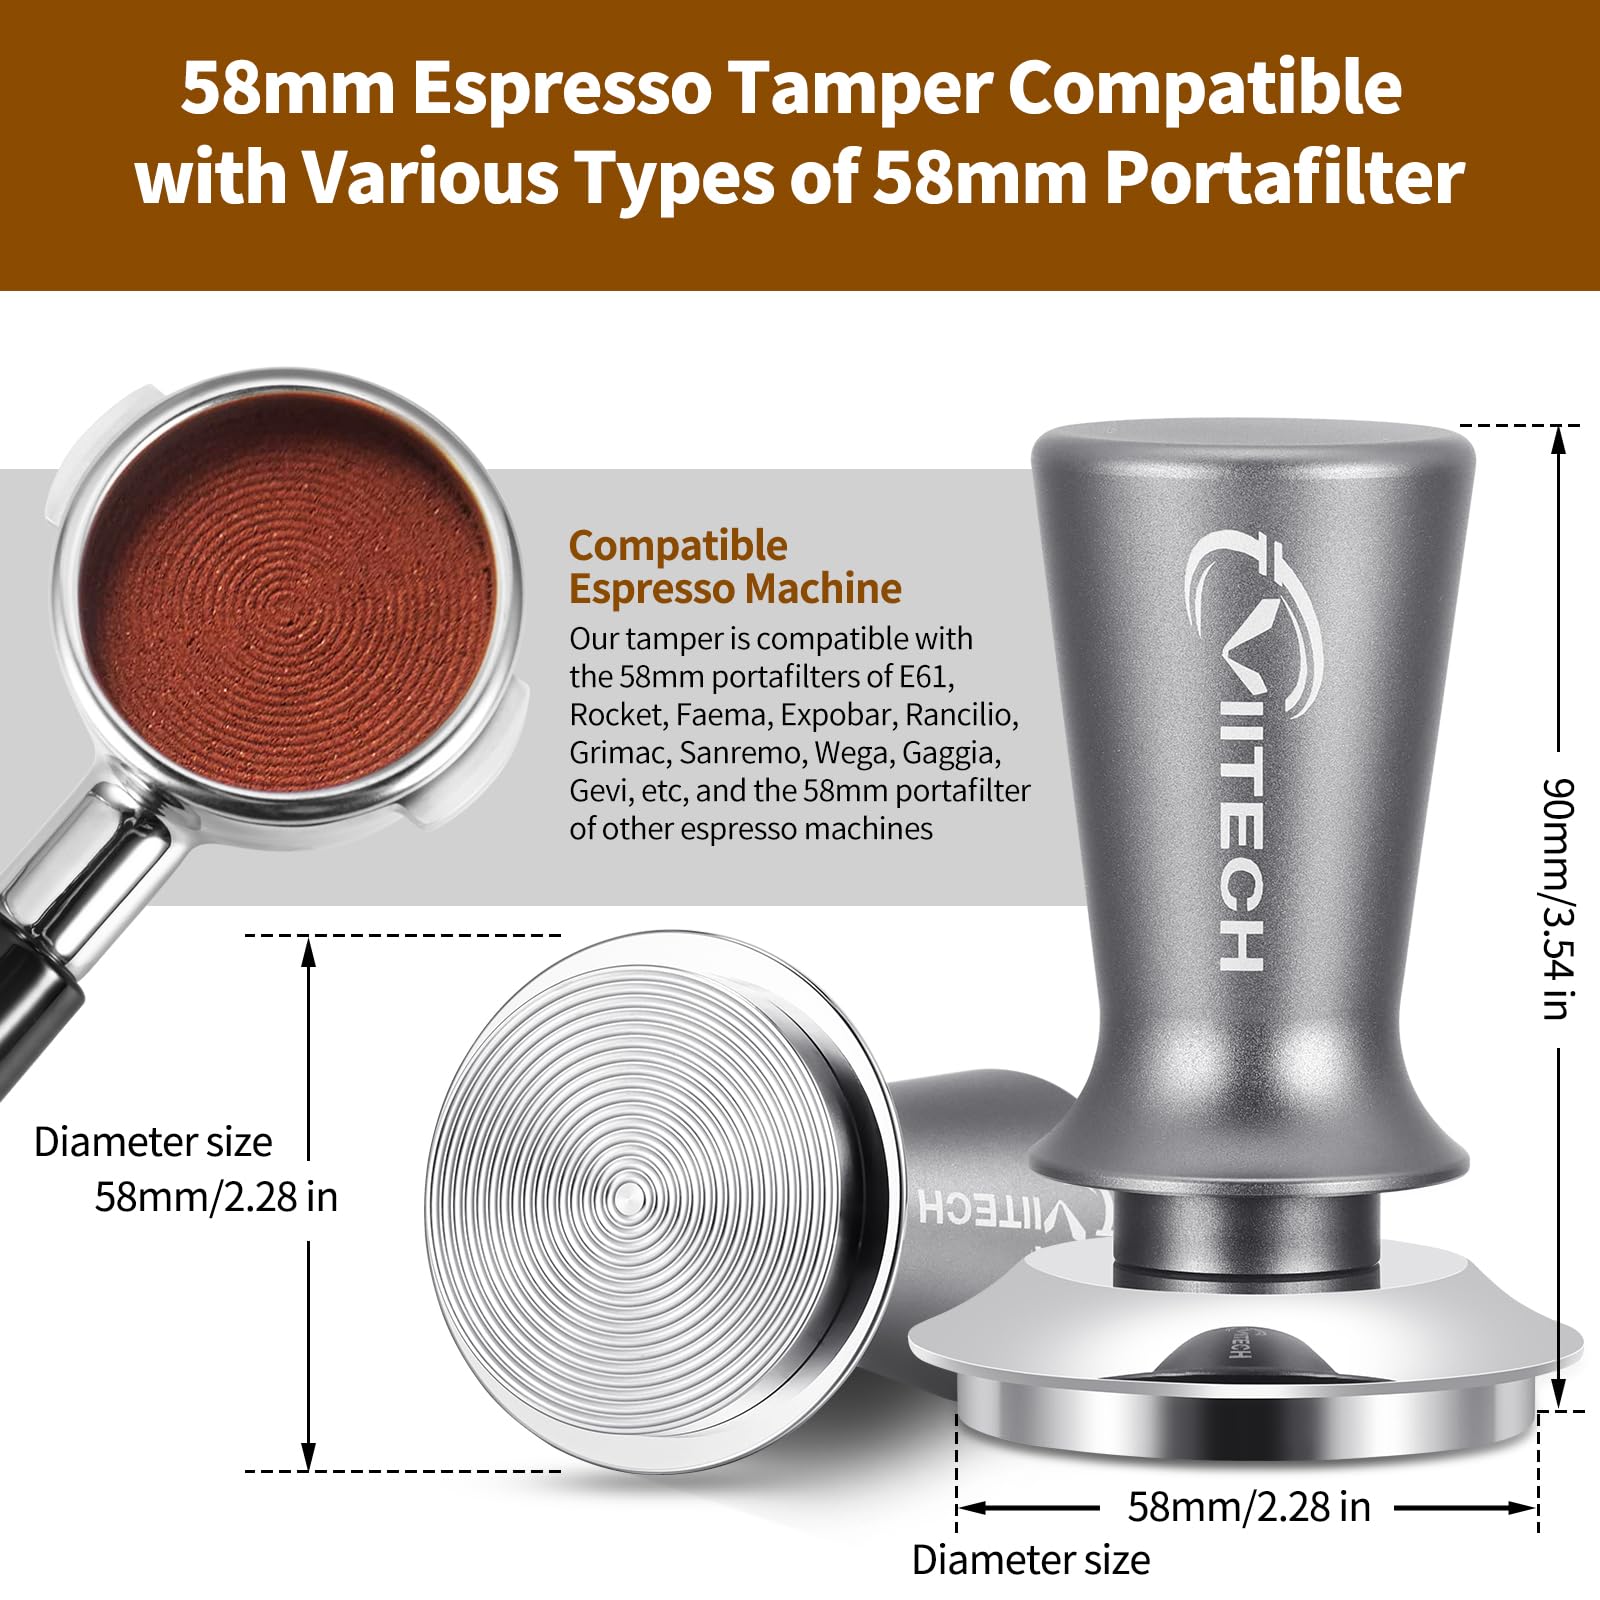 Espresso Tamper, Viitech 58mm Coffee Tamper for Espresso Machine, Premium Calibrated Tamper with Spring Loaded, Stainless Steel Flat Ripple Base, Constant 30lb Hand Tamper Tools for Home Barista